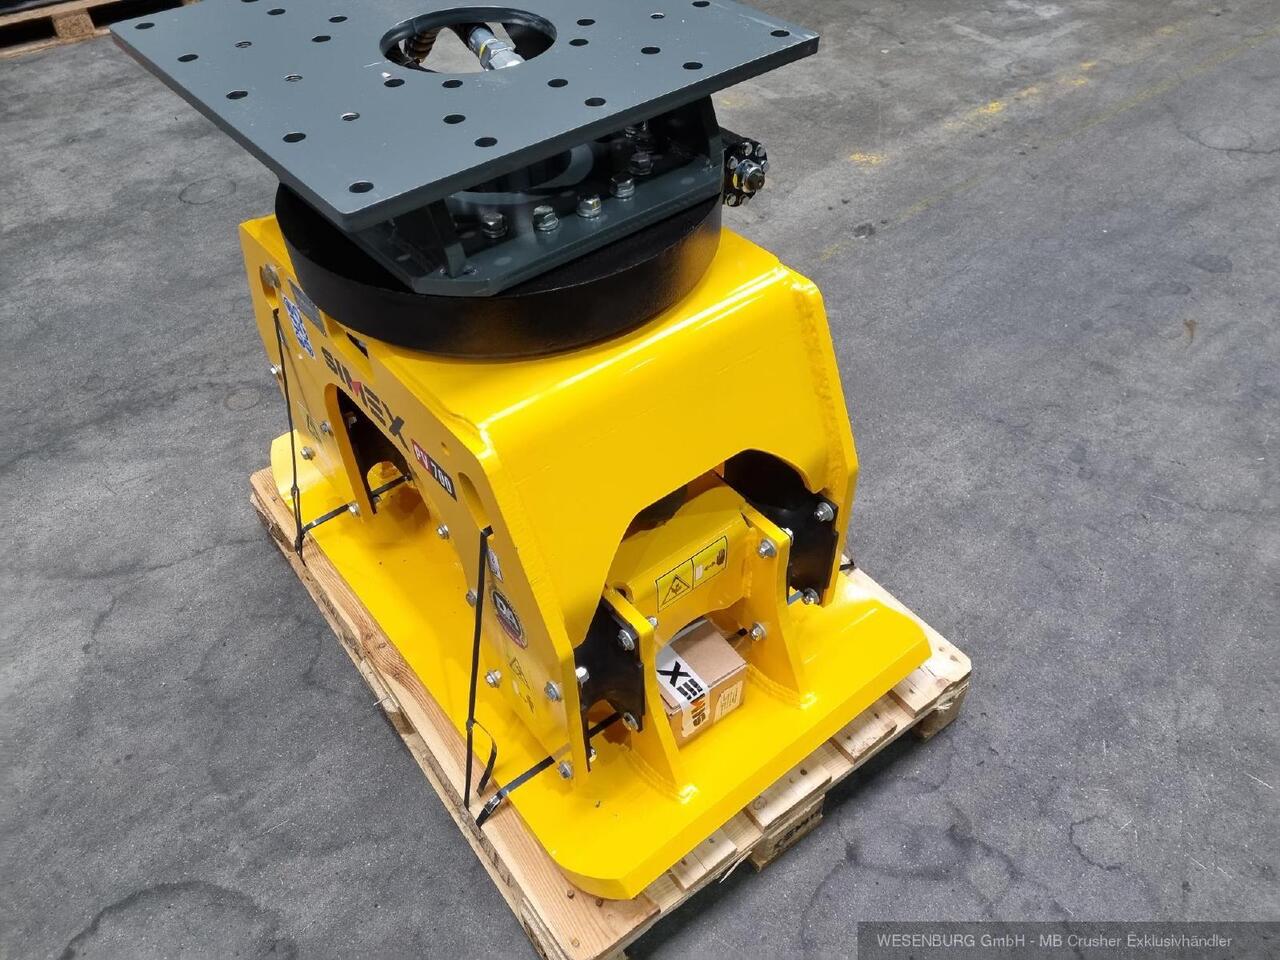 New Attachment, Plate compactor for Excavator Simex Anbauverdichter PV700 inkl. Drehwerk Anbauklasse 12 - 25 t: picture 2